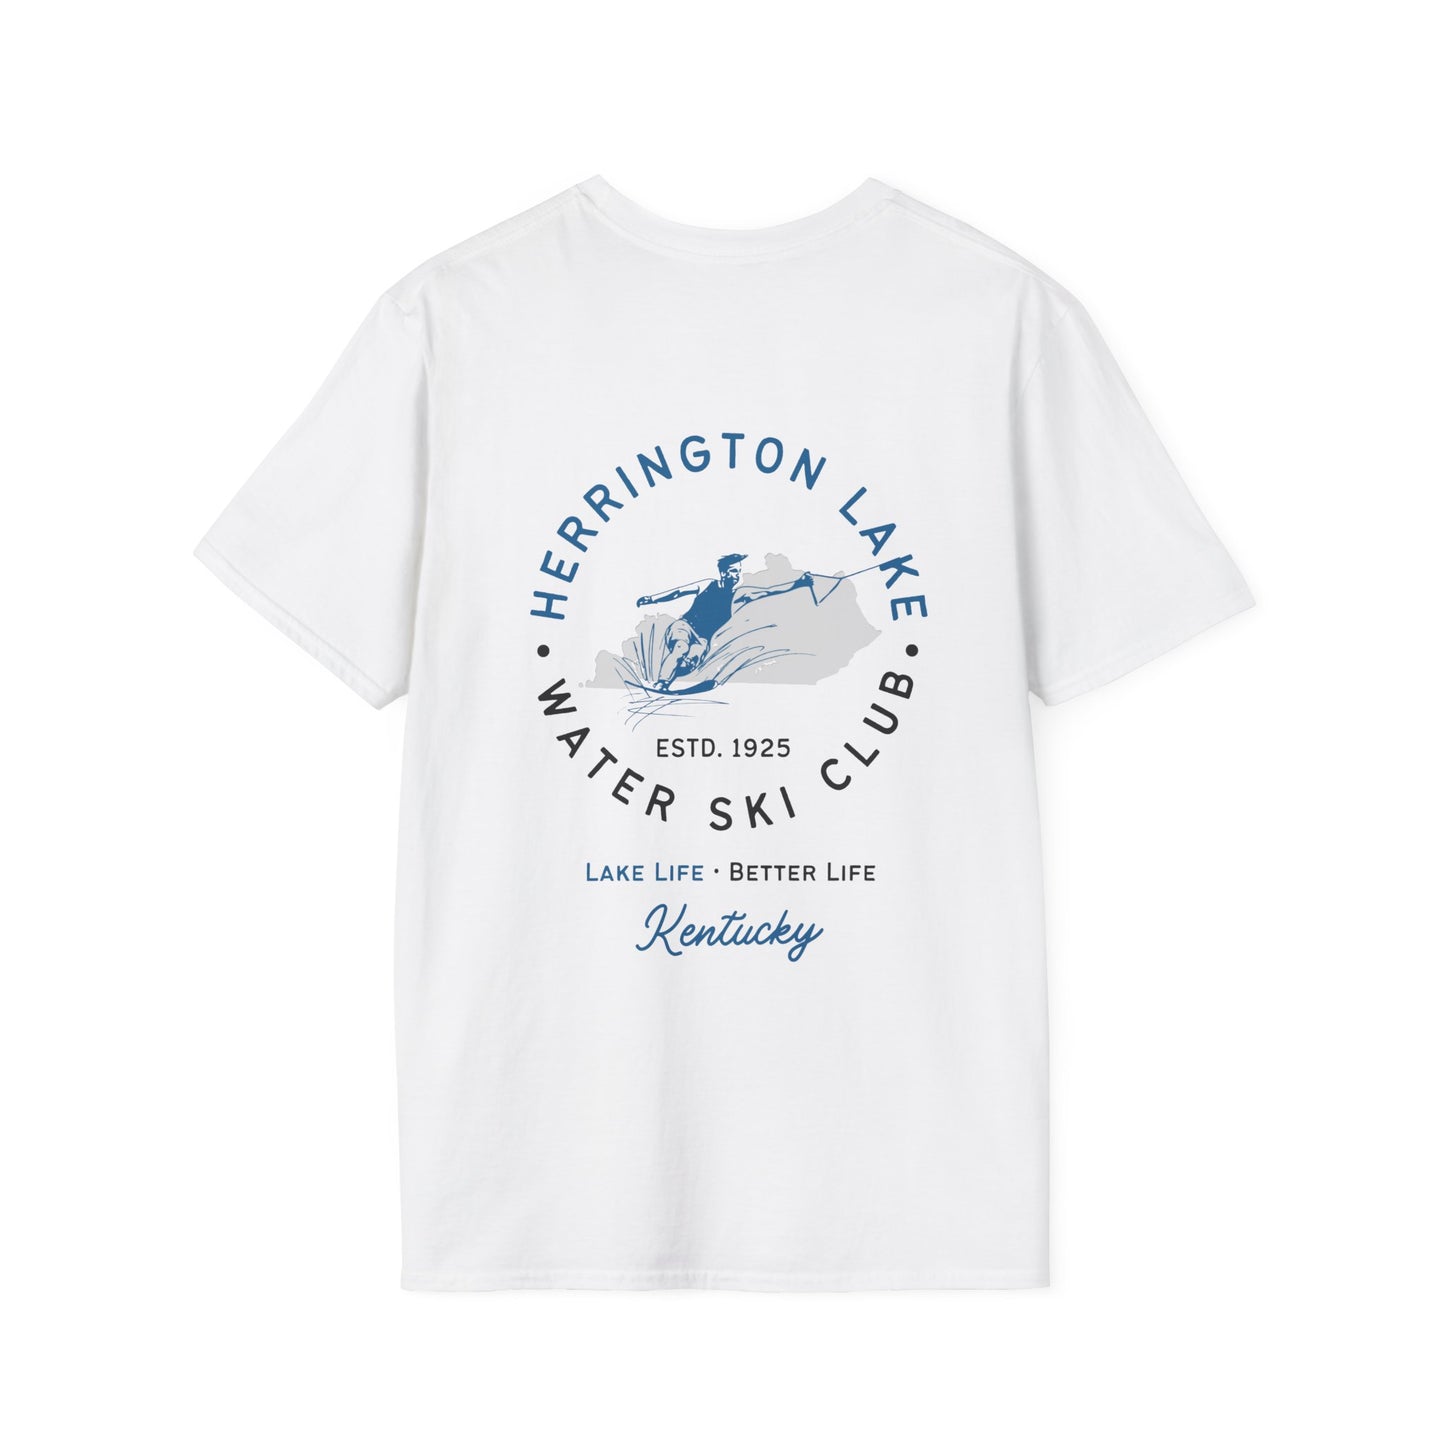 HLKY Ski Club Soft Ringspun Cotton Double-Sided Tee